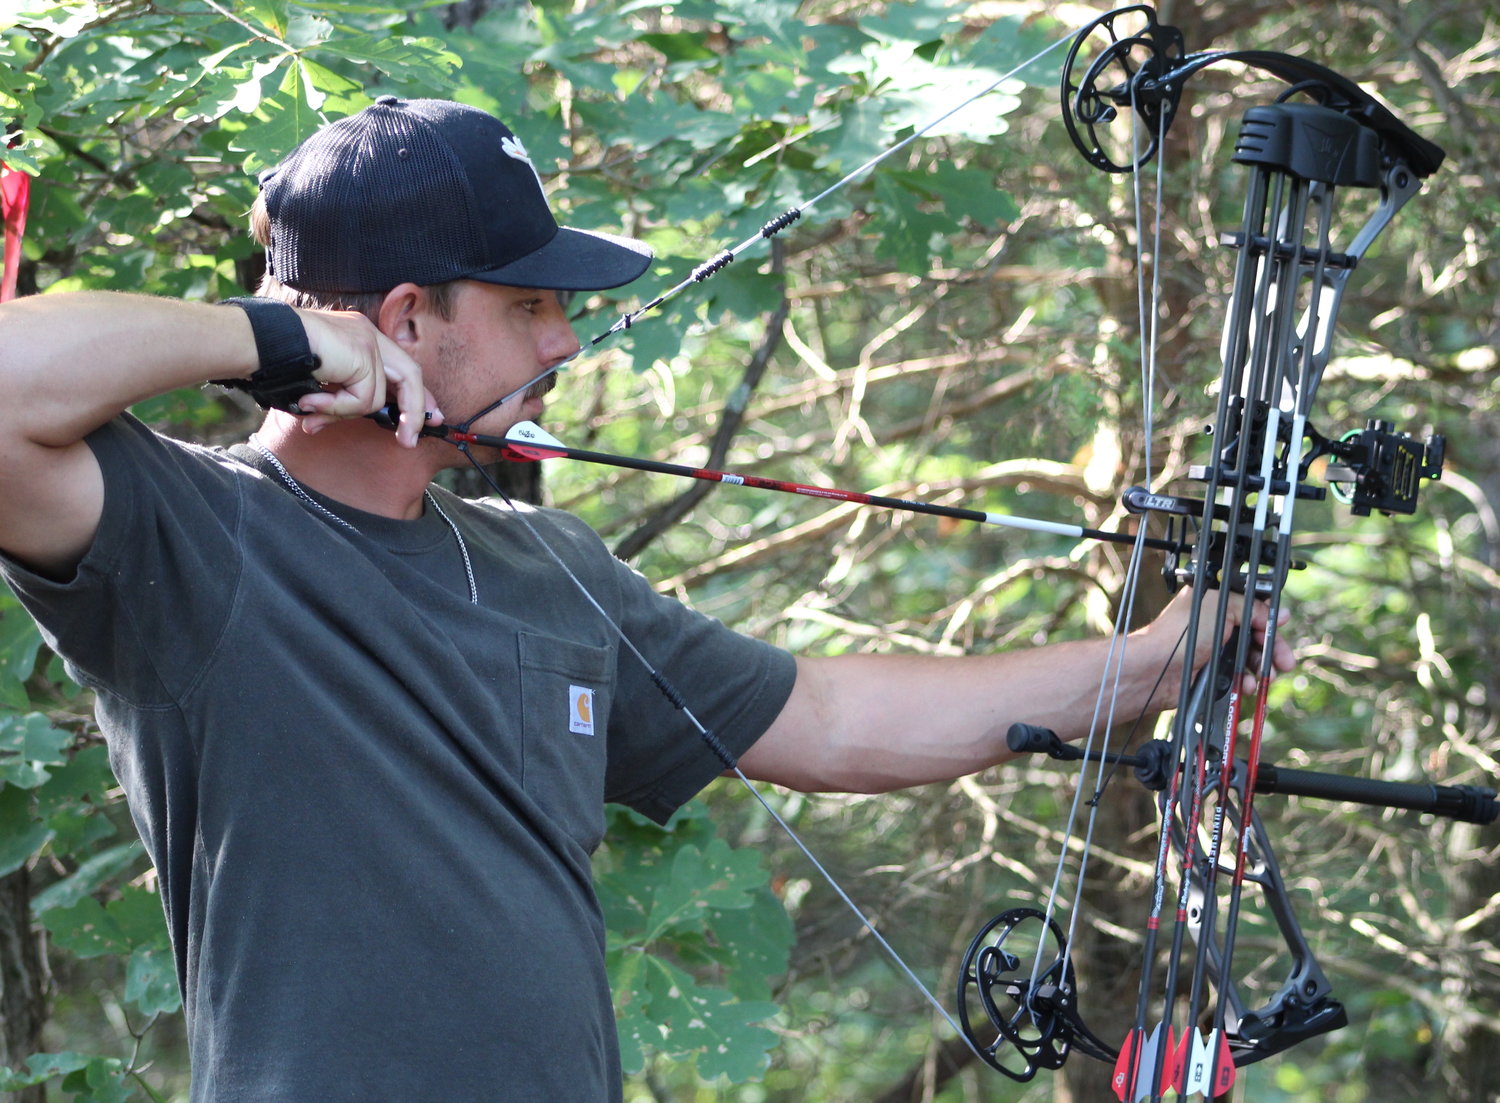 Hoping to get a perfect shot is  Casey, another archer seen at the event prepares his shot. He is just one of the nearly 850 people that participated in the bowshoot this Saturday.